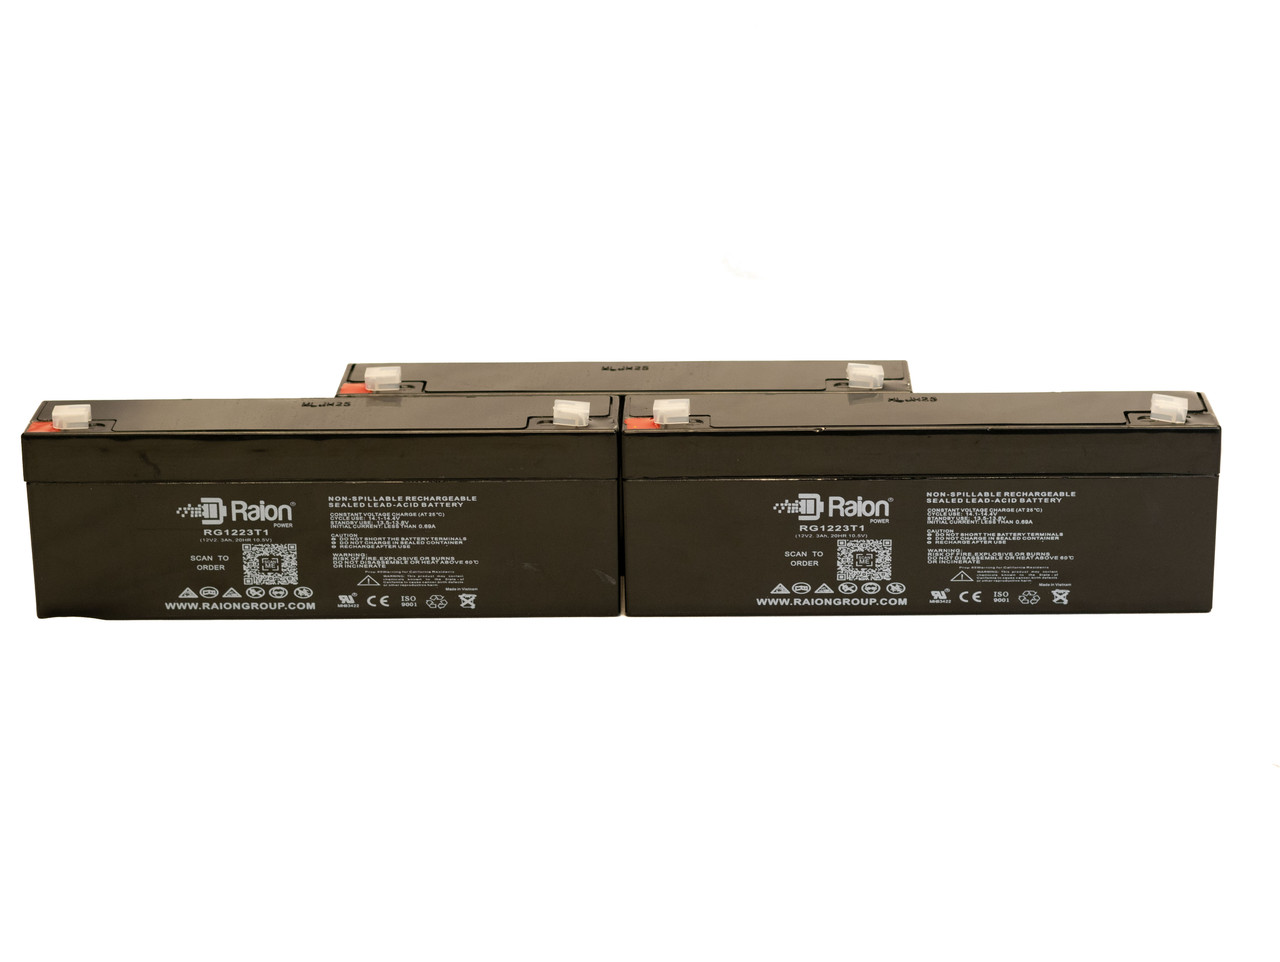 Raion Power 12V 2.3Ah RG1223T1 Replacement Medical Battery for Abbott Laboratories DH2 - 3 Pack